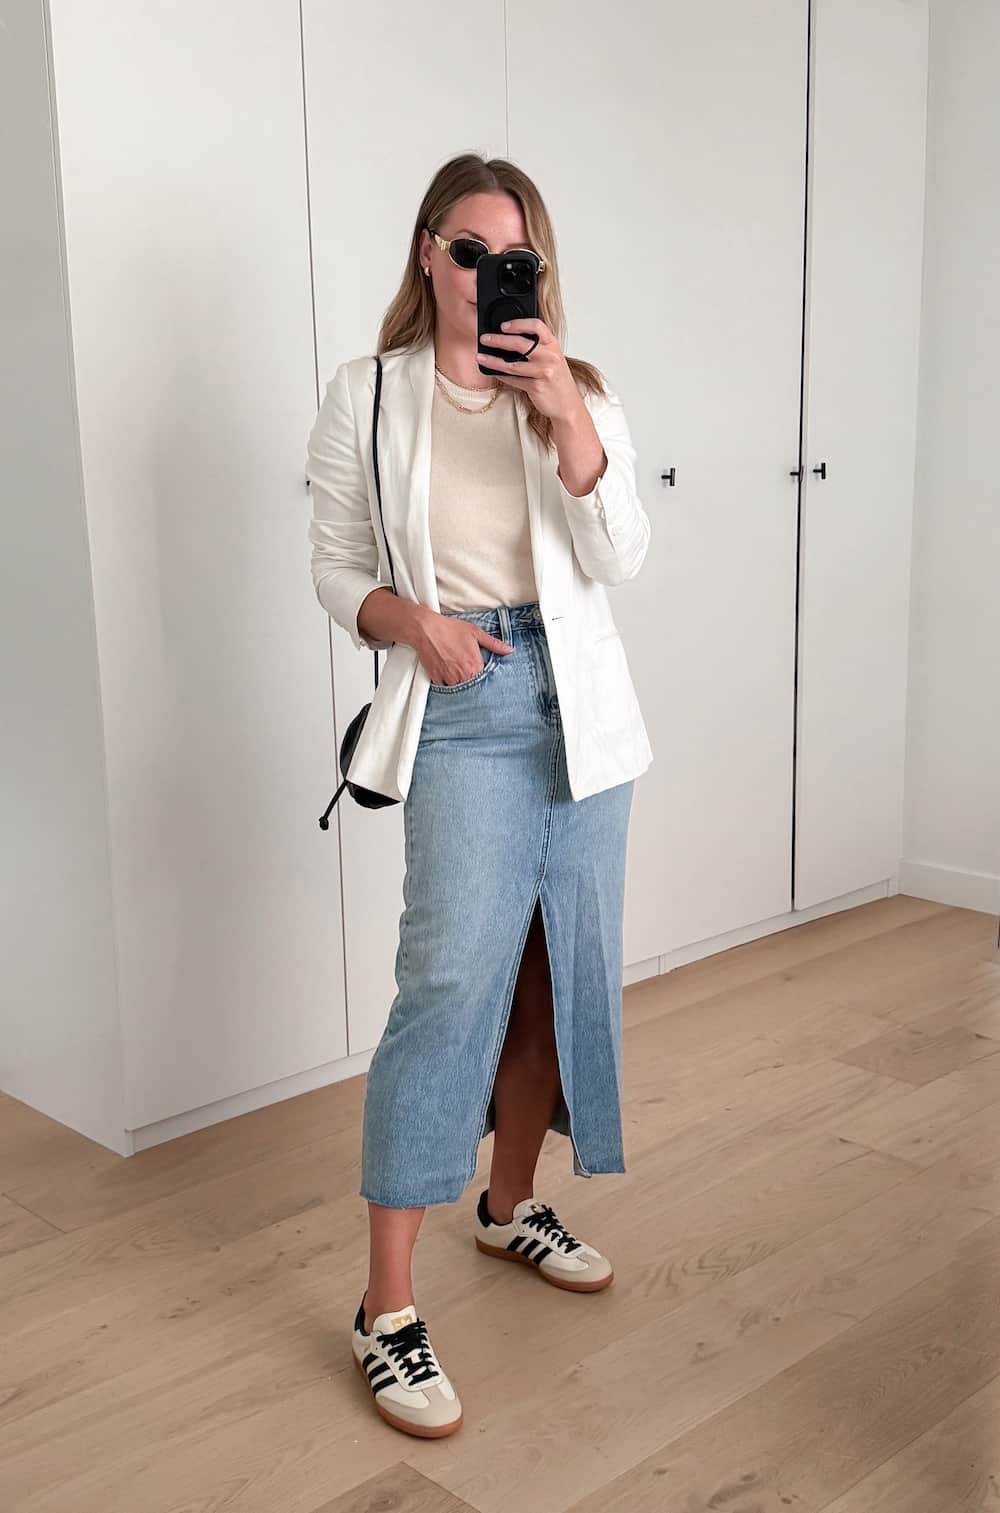 Christal wearing a denim midi skirt, a cream sweater, sneakers and a white blazer.